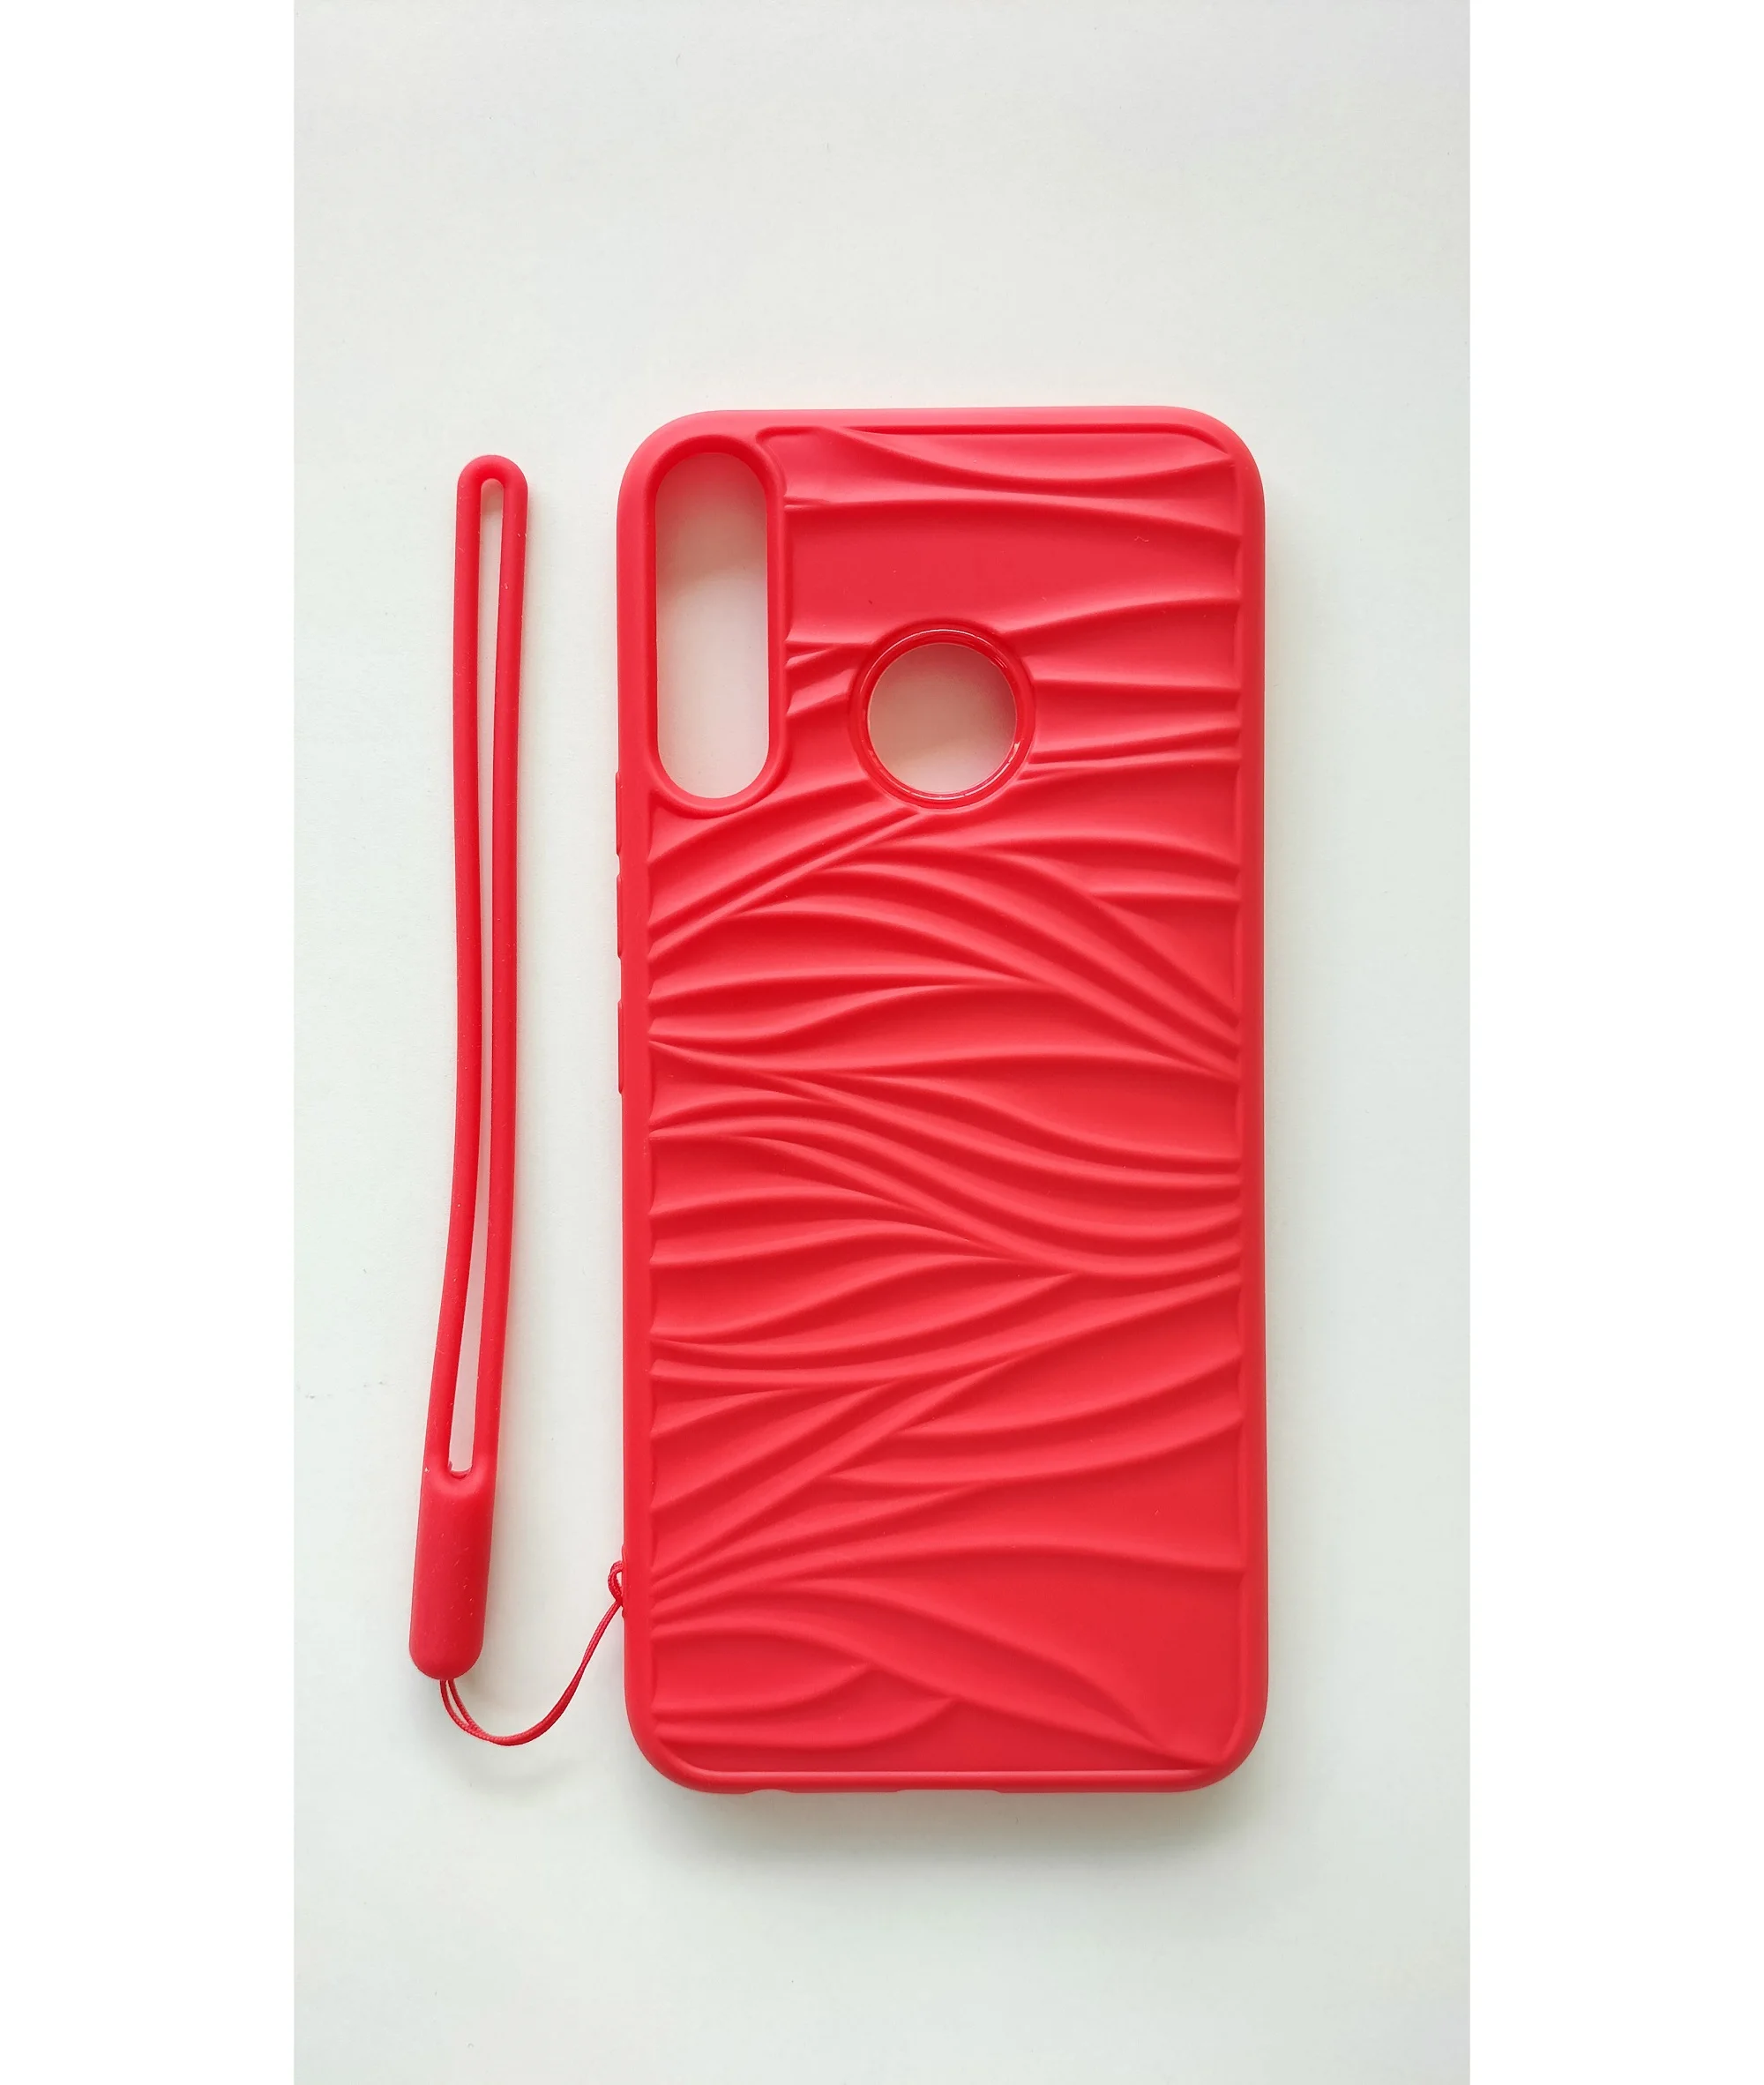 Wholesale New Tpu Shockproof Phone Case For Itel Cover Mobile Case For Itel P37 Pro Buy Shockproof Phone Case For Itel P37 Pro Tpu Mobile Phone Case Product On Alibaba Com